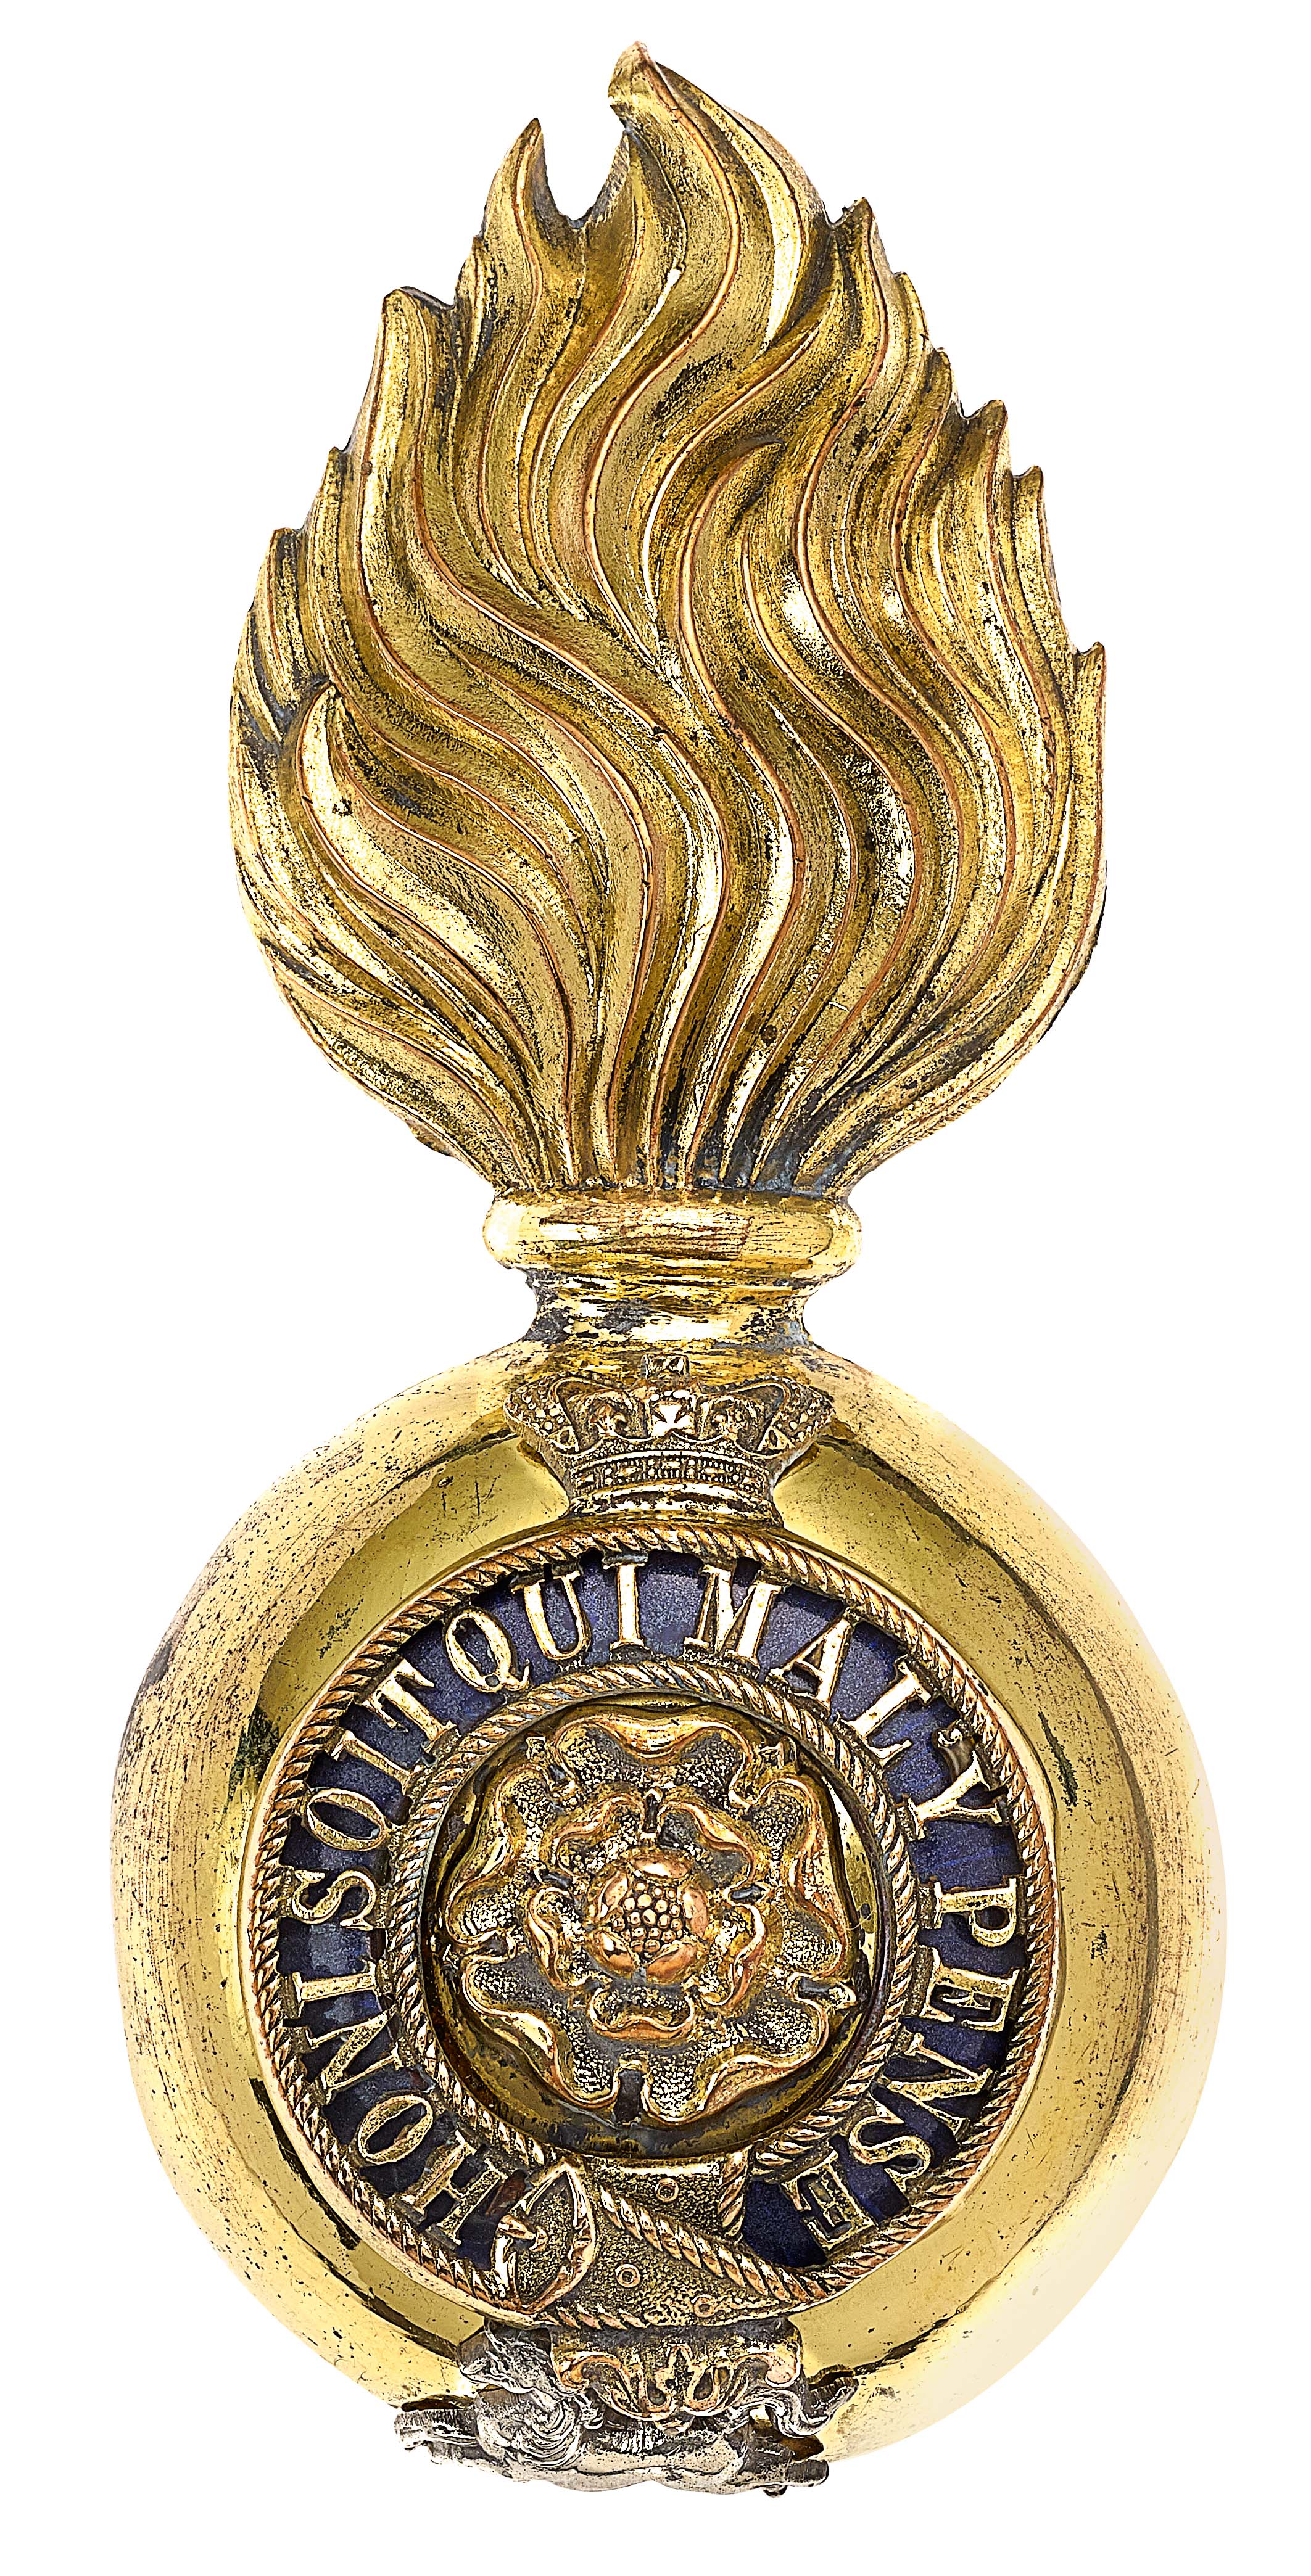 The Royal Fusiliers (City of London Regiment), Victorian Officer’s fur cap grenade circa 1881-1901.